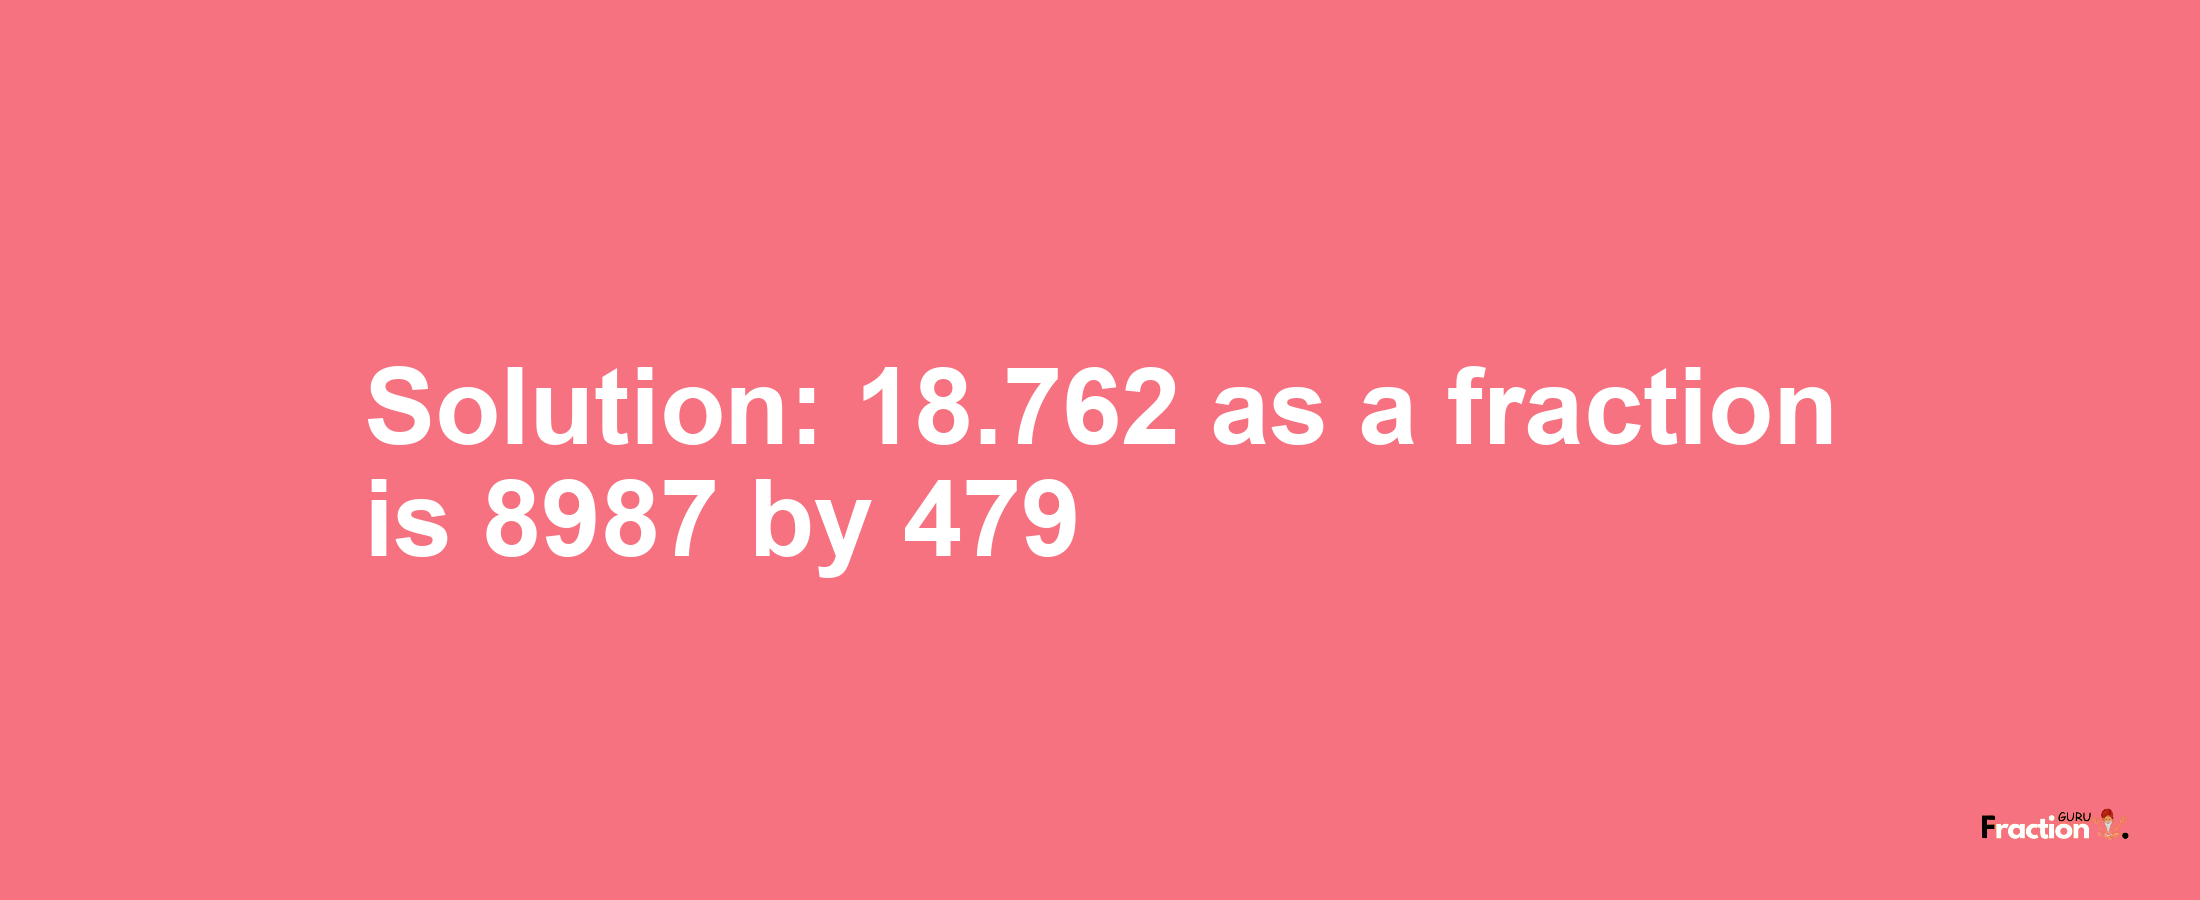 Solution:18.762 as a fraction is 8987/479